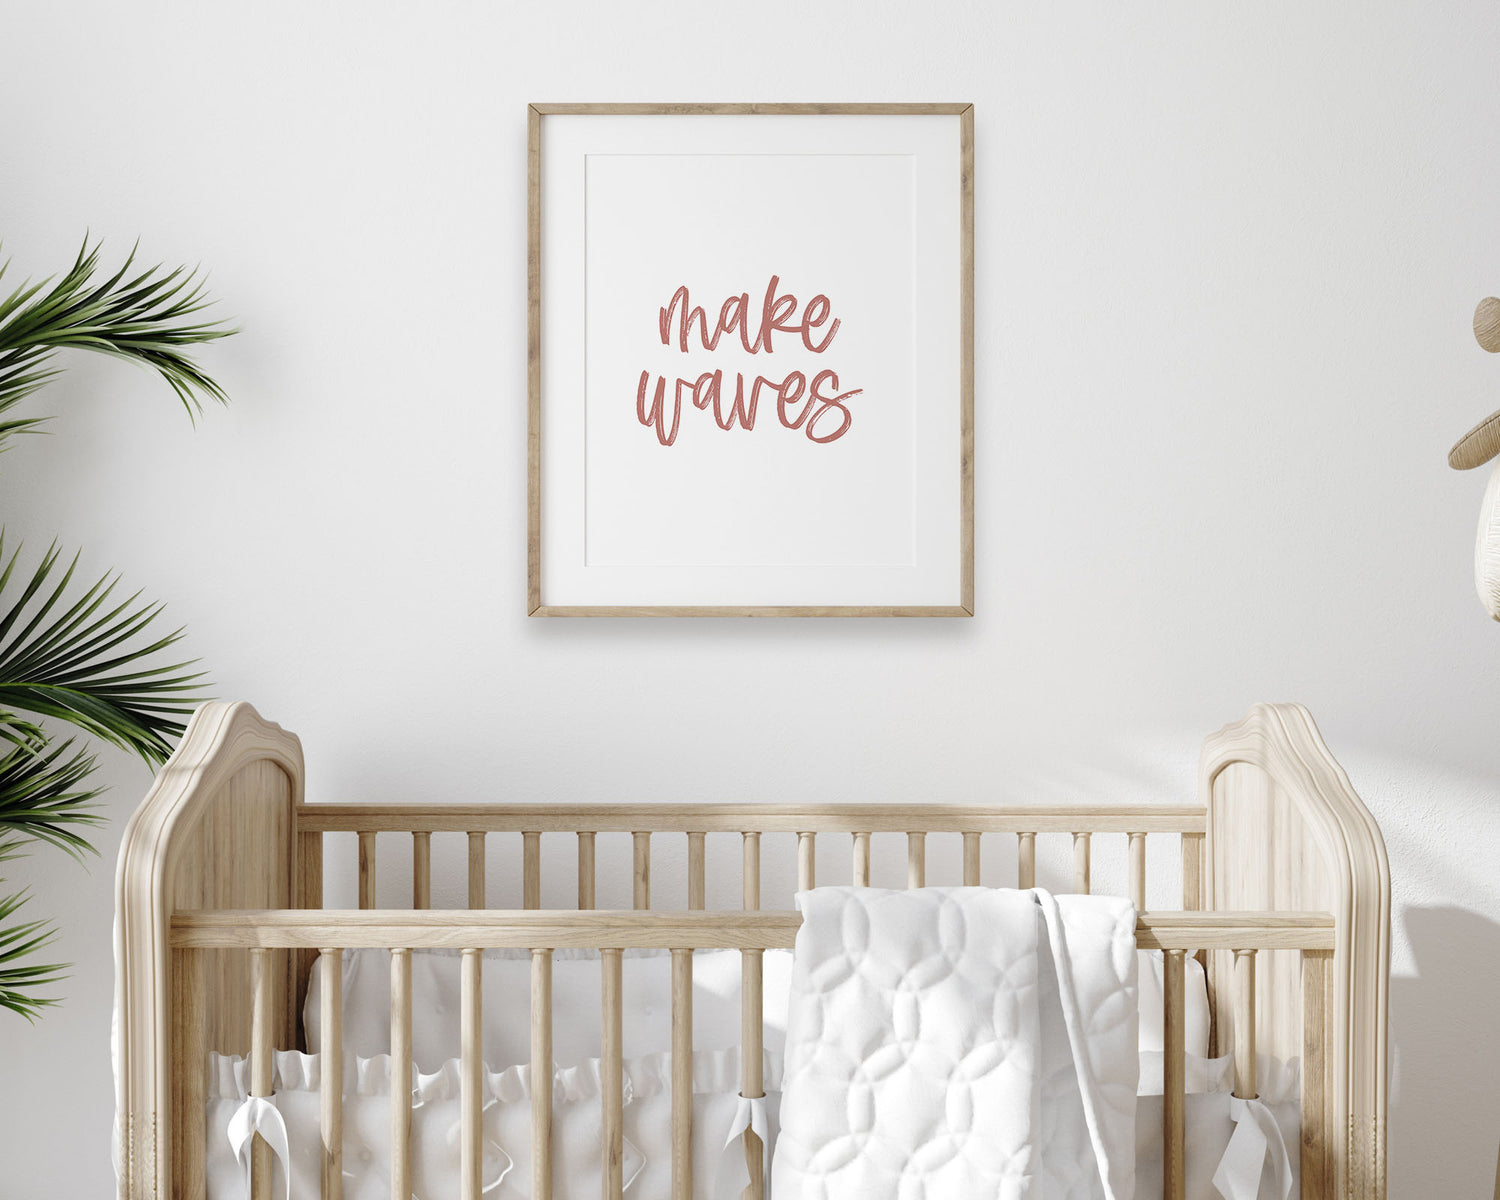 Dusty Rose Make Waves Printable Wall Art featuring a textured brush style cursive lettered quote perfect for Baby Boy Nautical Nursery Decor, Baby Girl Surf Nursery Wall Art, Nautical Kids Bedroom Decor or Children's Coastal Bathroom Wall Art.